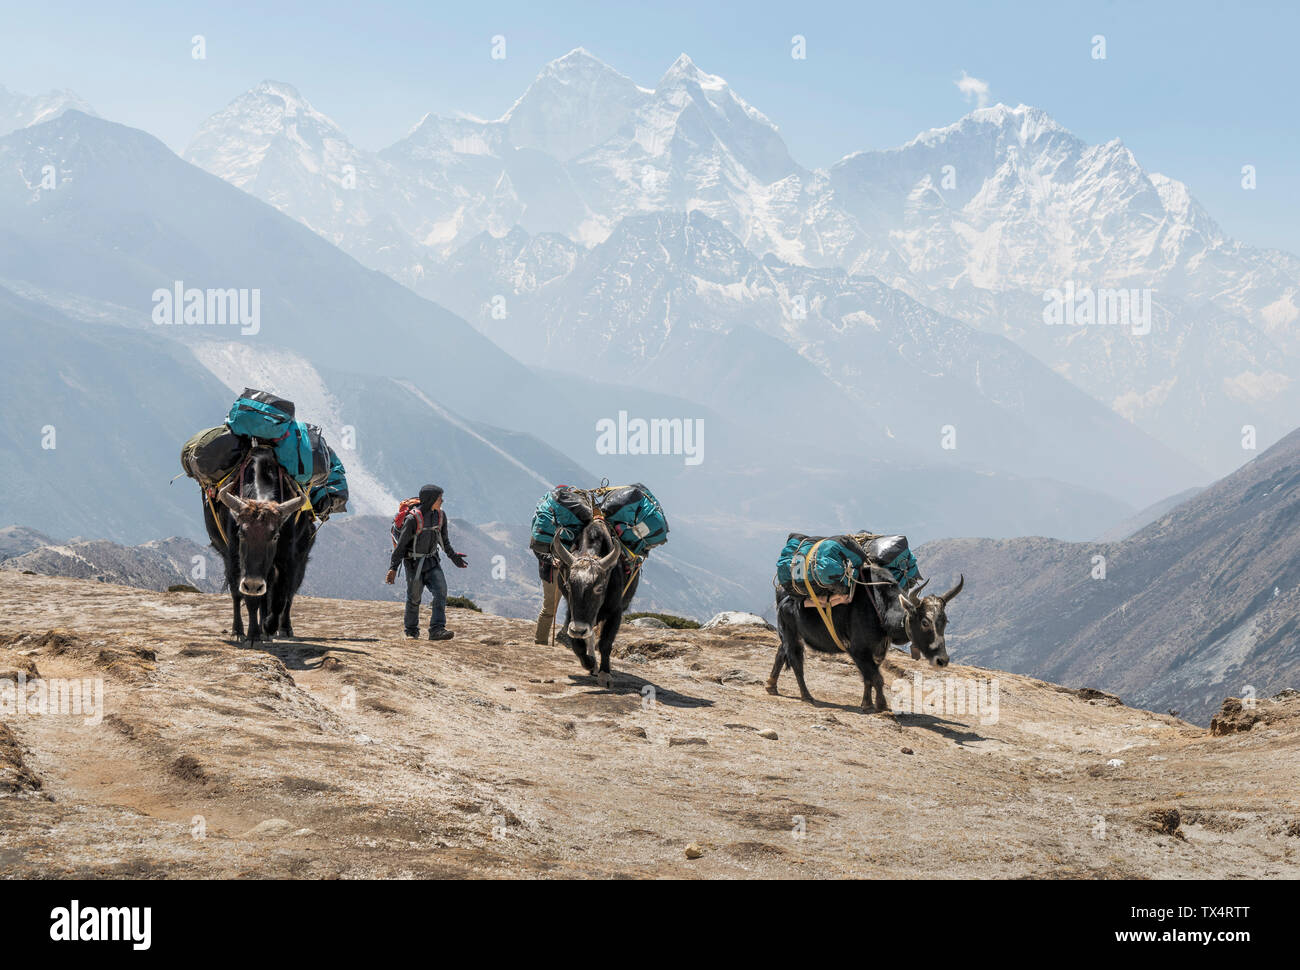 Nepal, Solo Khumbu, Everest, Dingboche, Sherpa guiding pack animals through the mountains Stock Photo